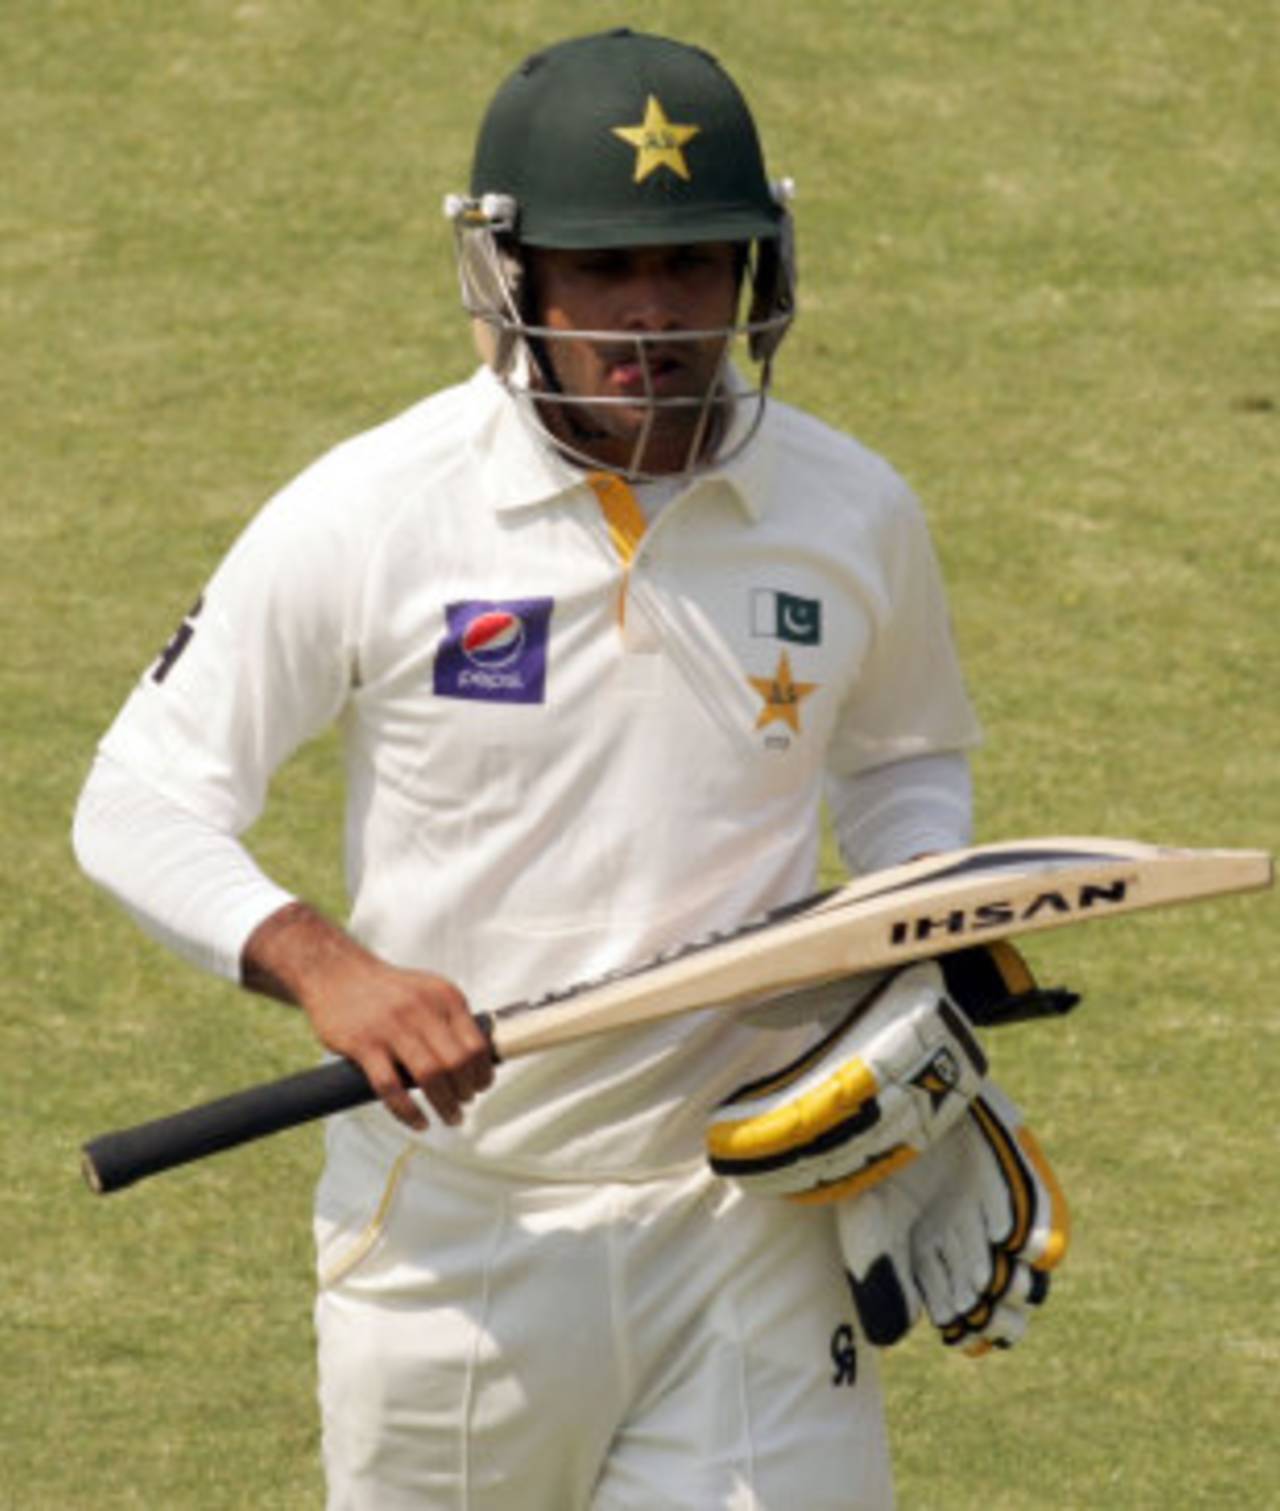 Mohammad Hafeez trudges back to the pavilion after a low score, Zimbabwe v Pakistan, 1st Test, Harare, 1st day, September 3, 2013